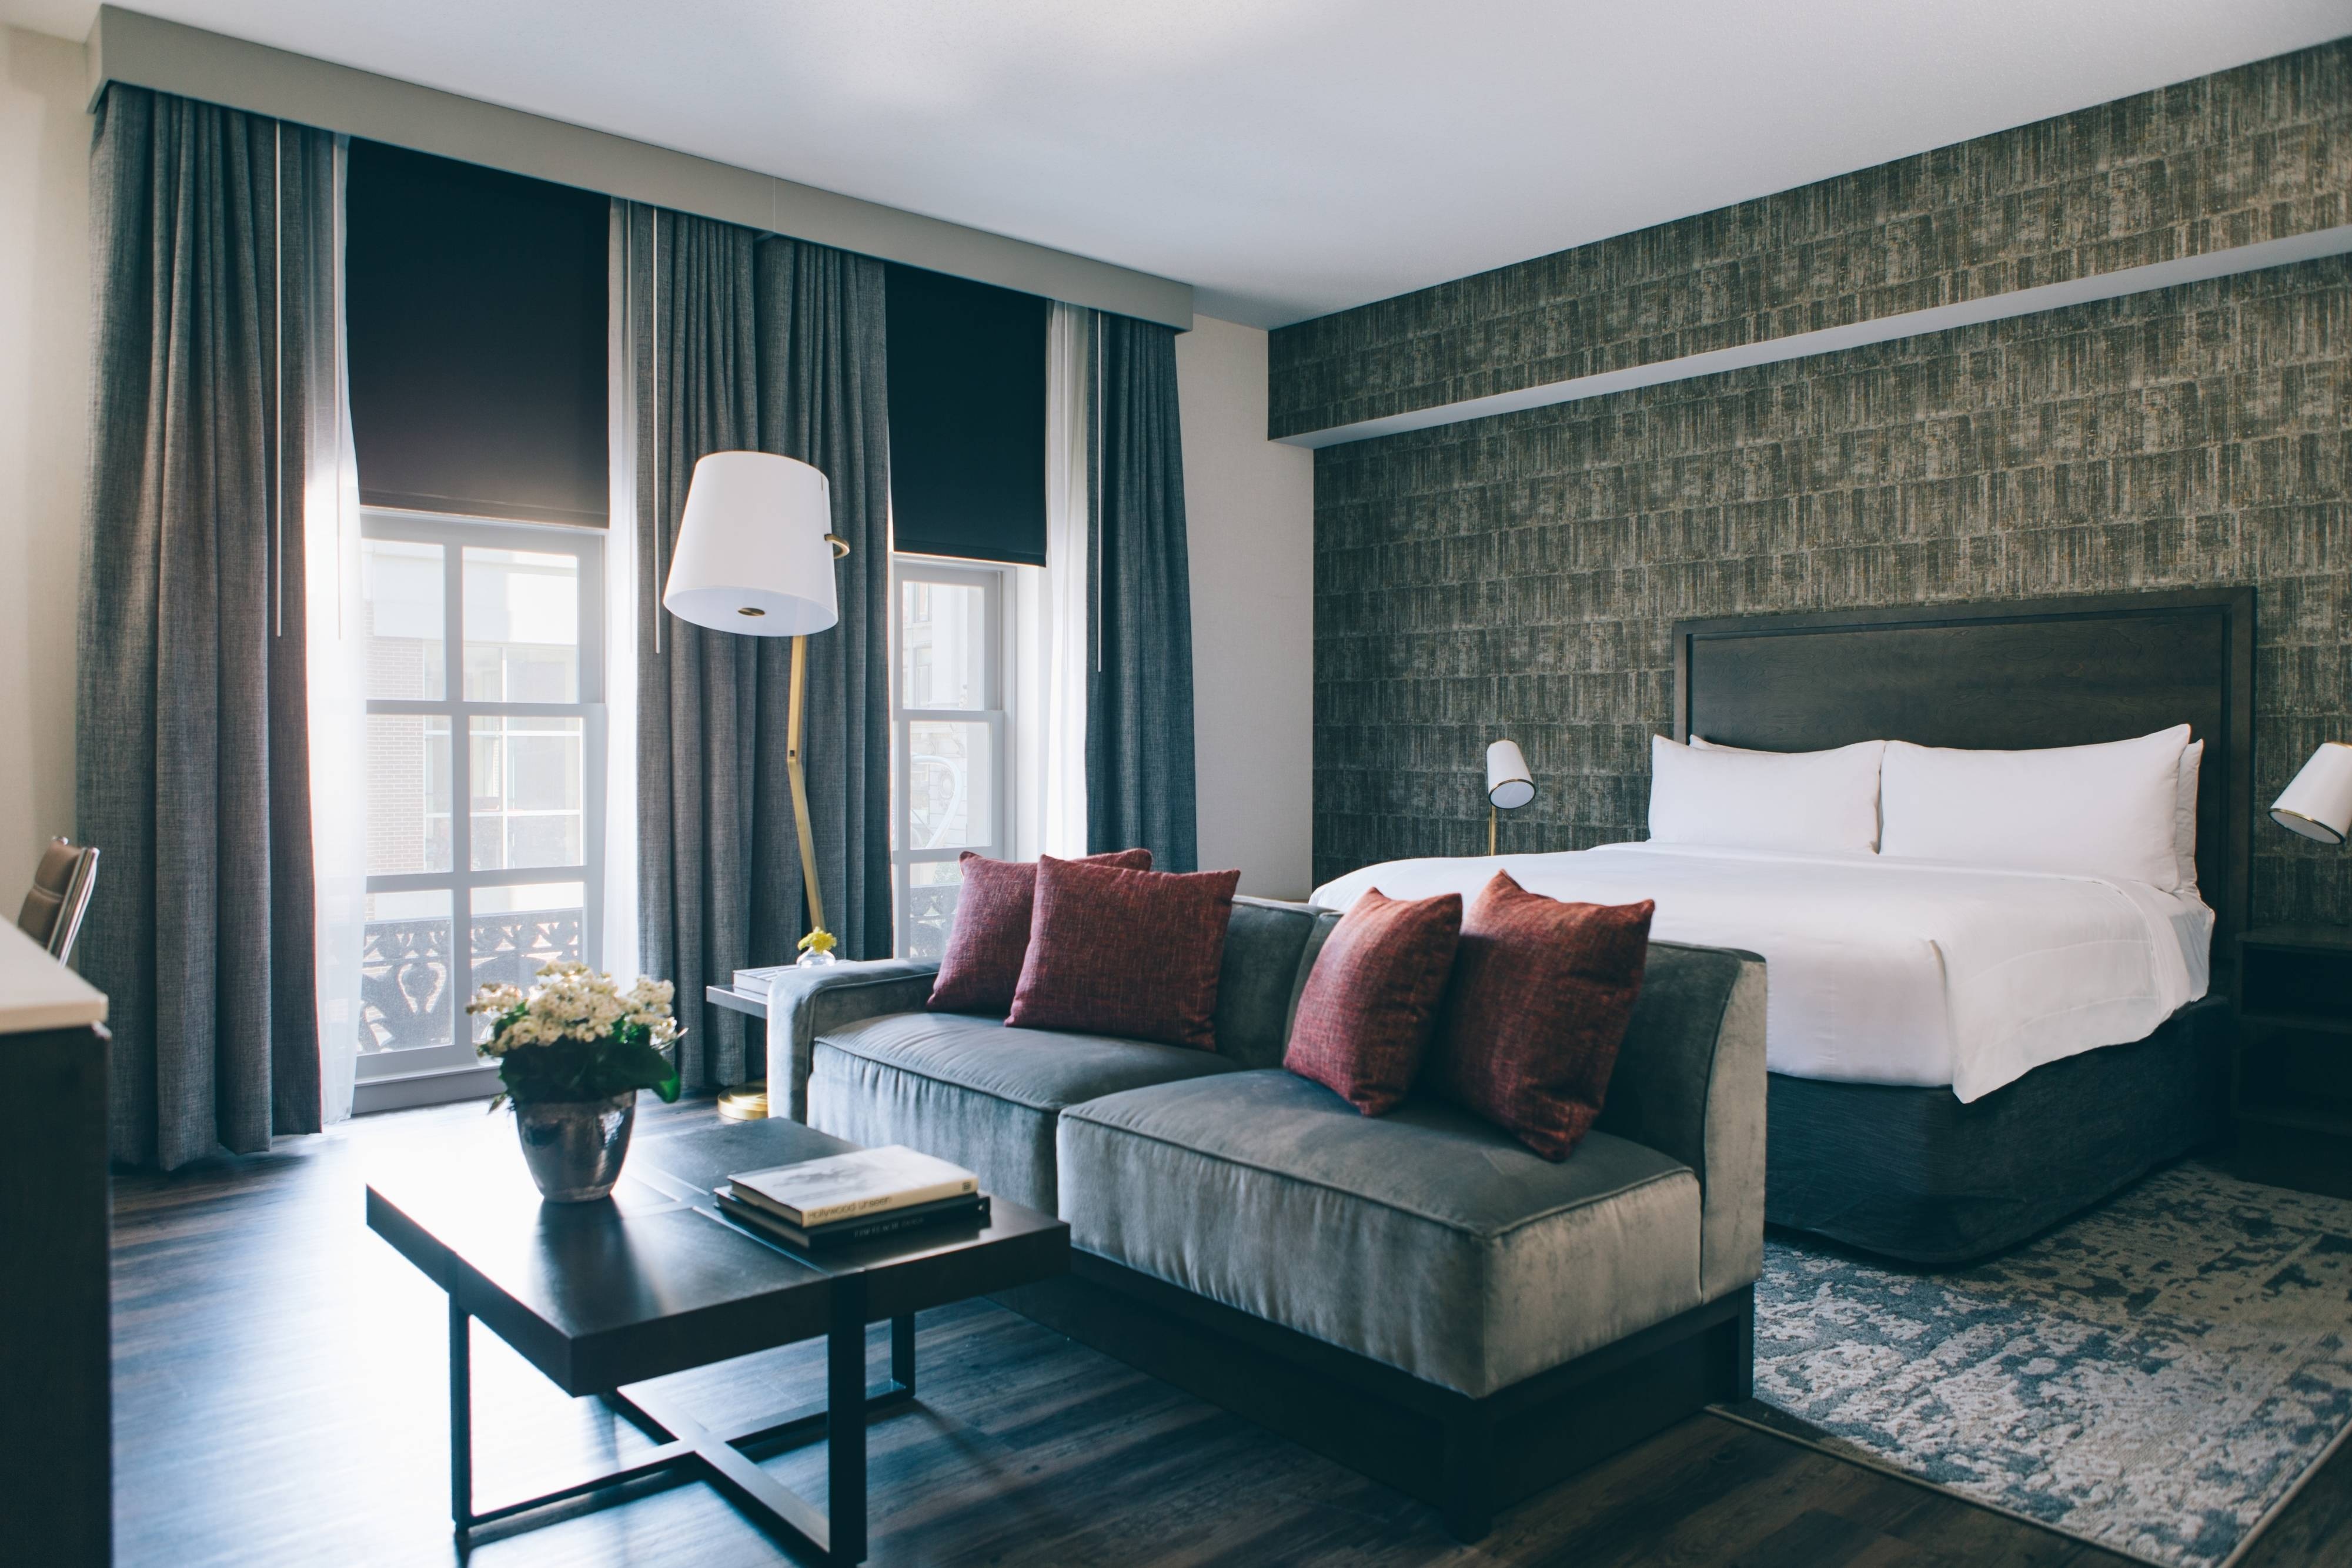 Accommodation St Louis Missouri - Downtown Hotel Rooms | Marriott St. Louis